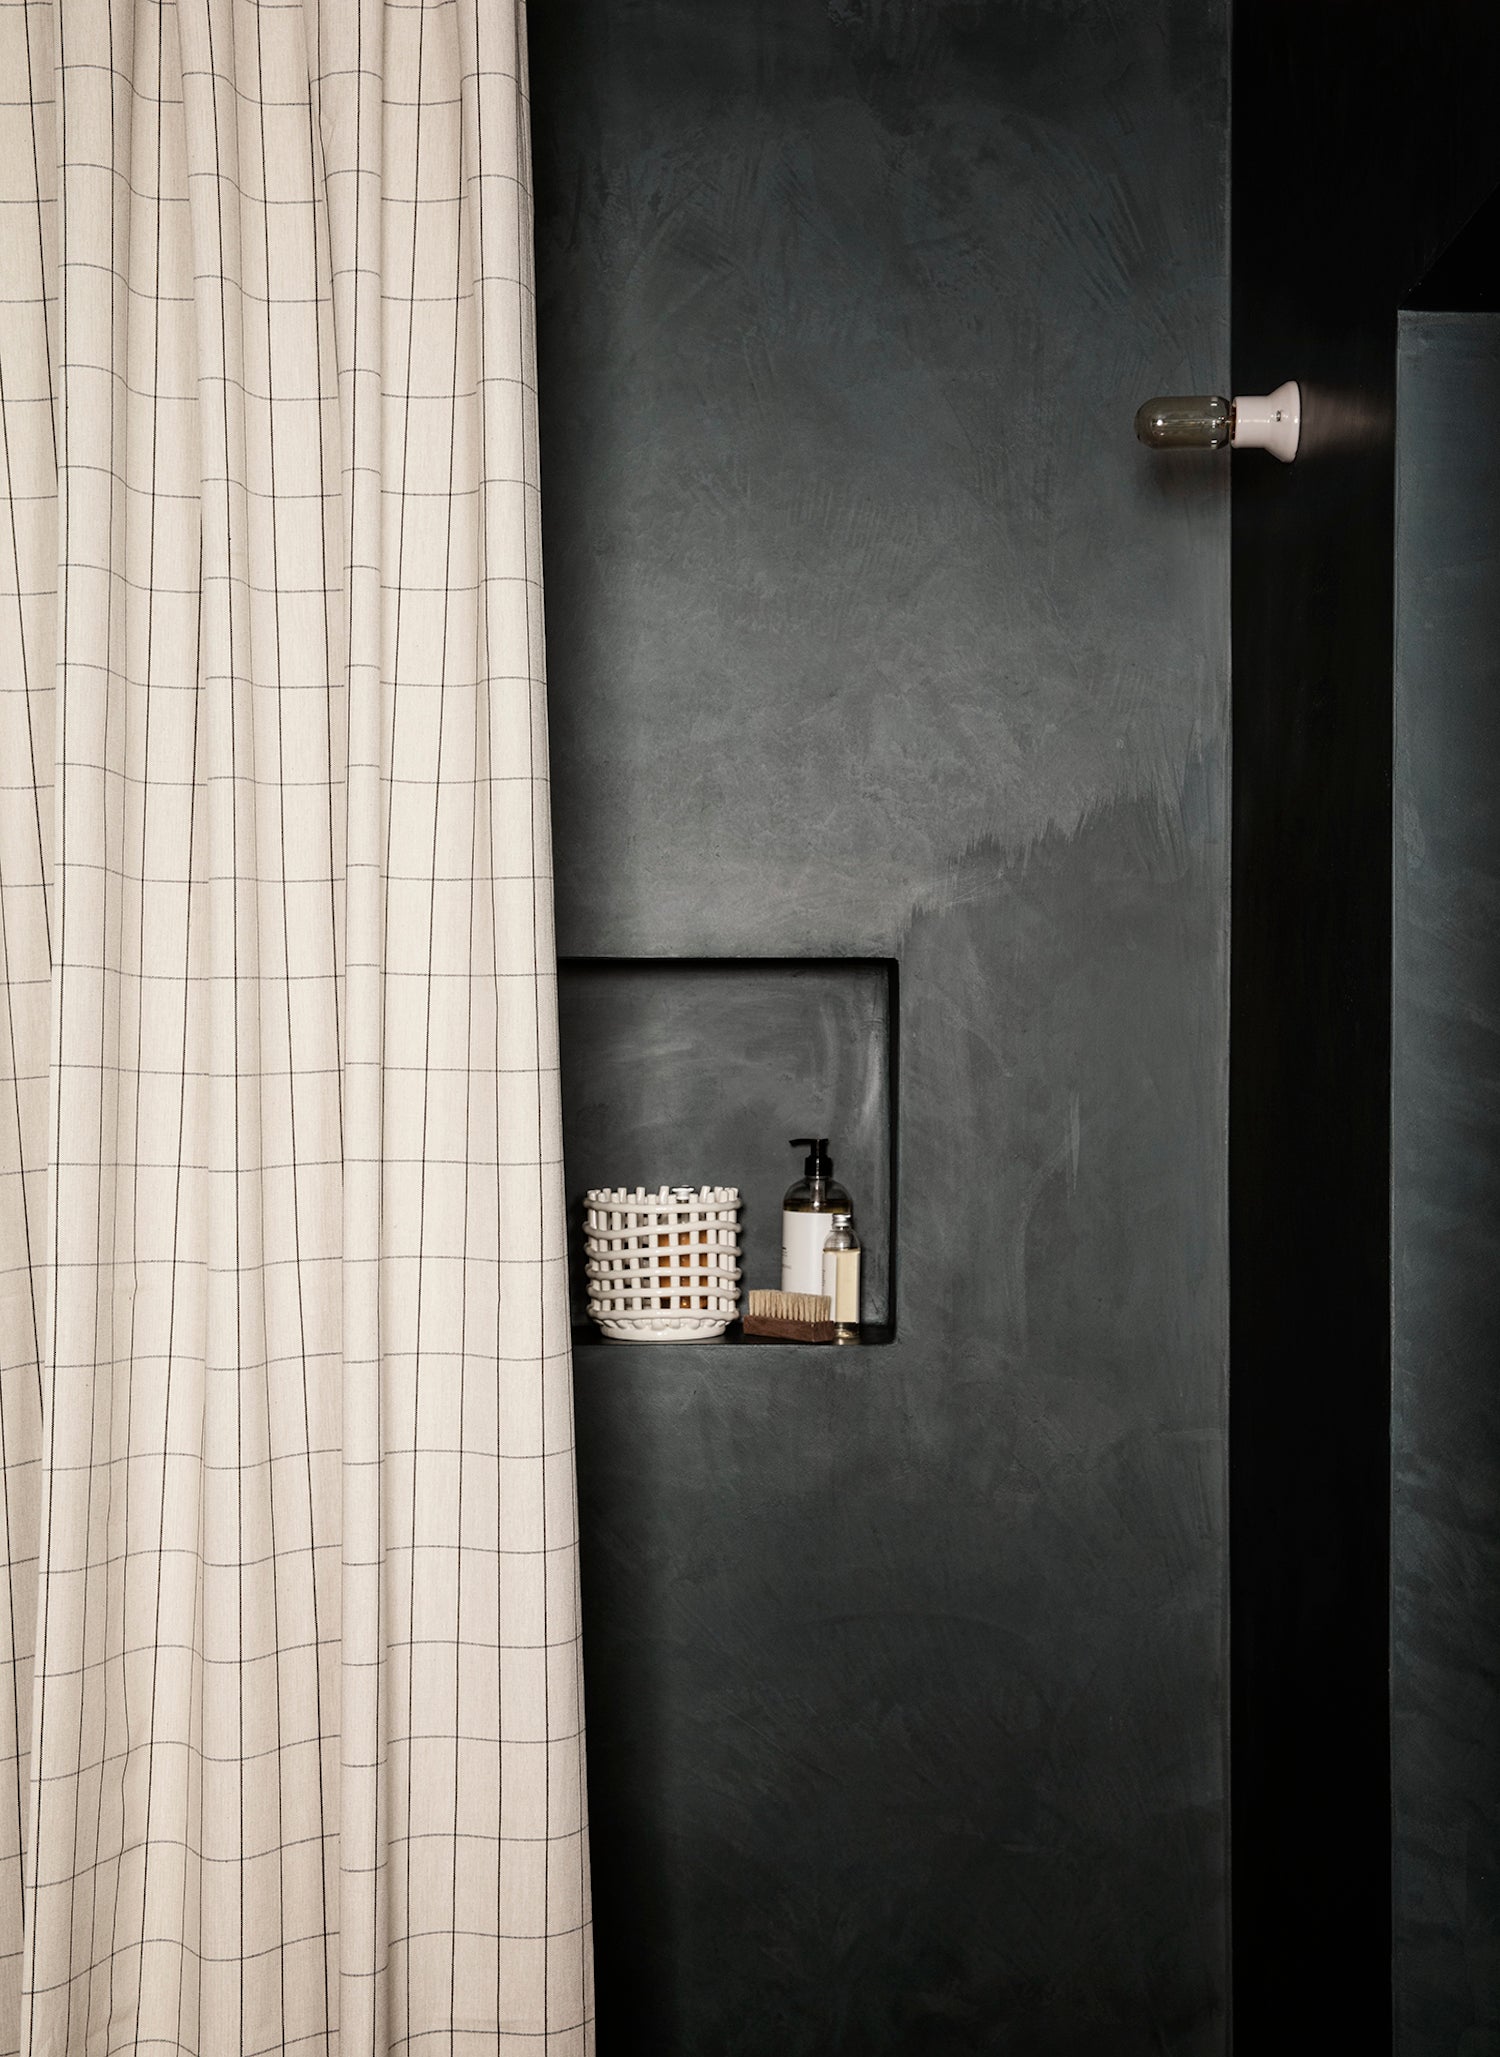 Chambray Shower Curtain. A geometric shower curtain with a grid pattern in beige and black crafted from GOTS certified, organic cotton chambray